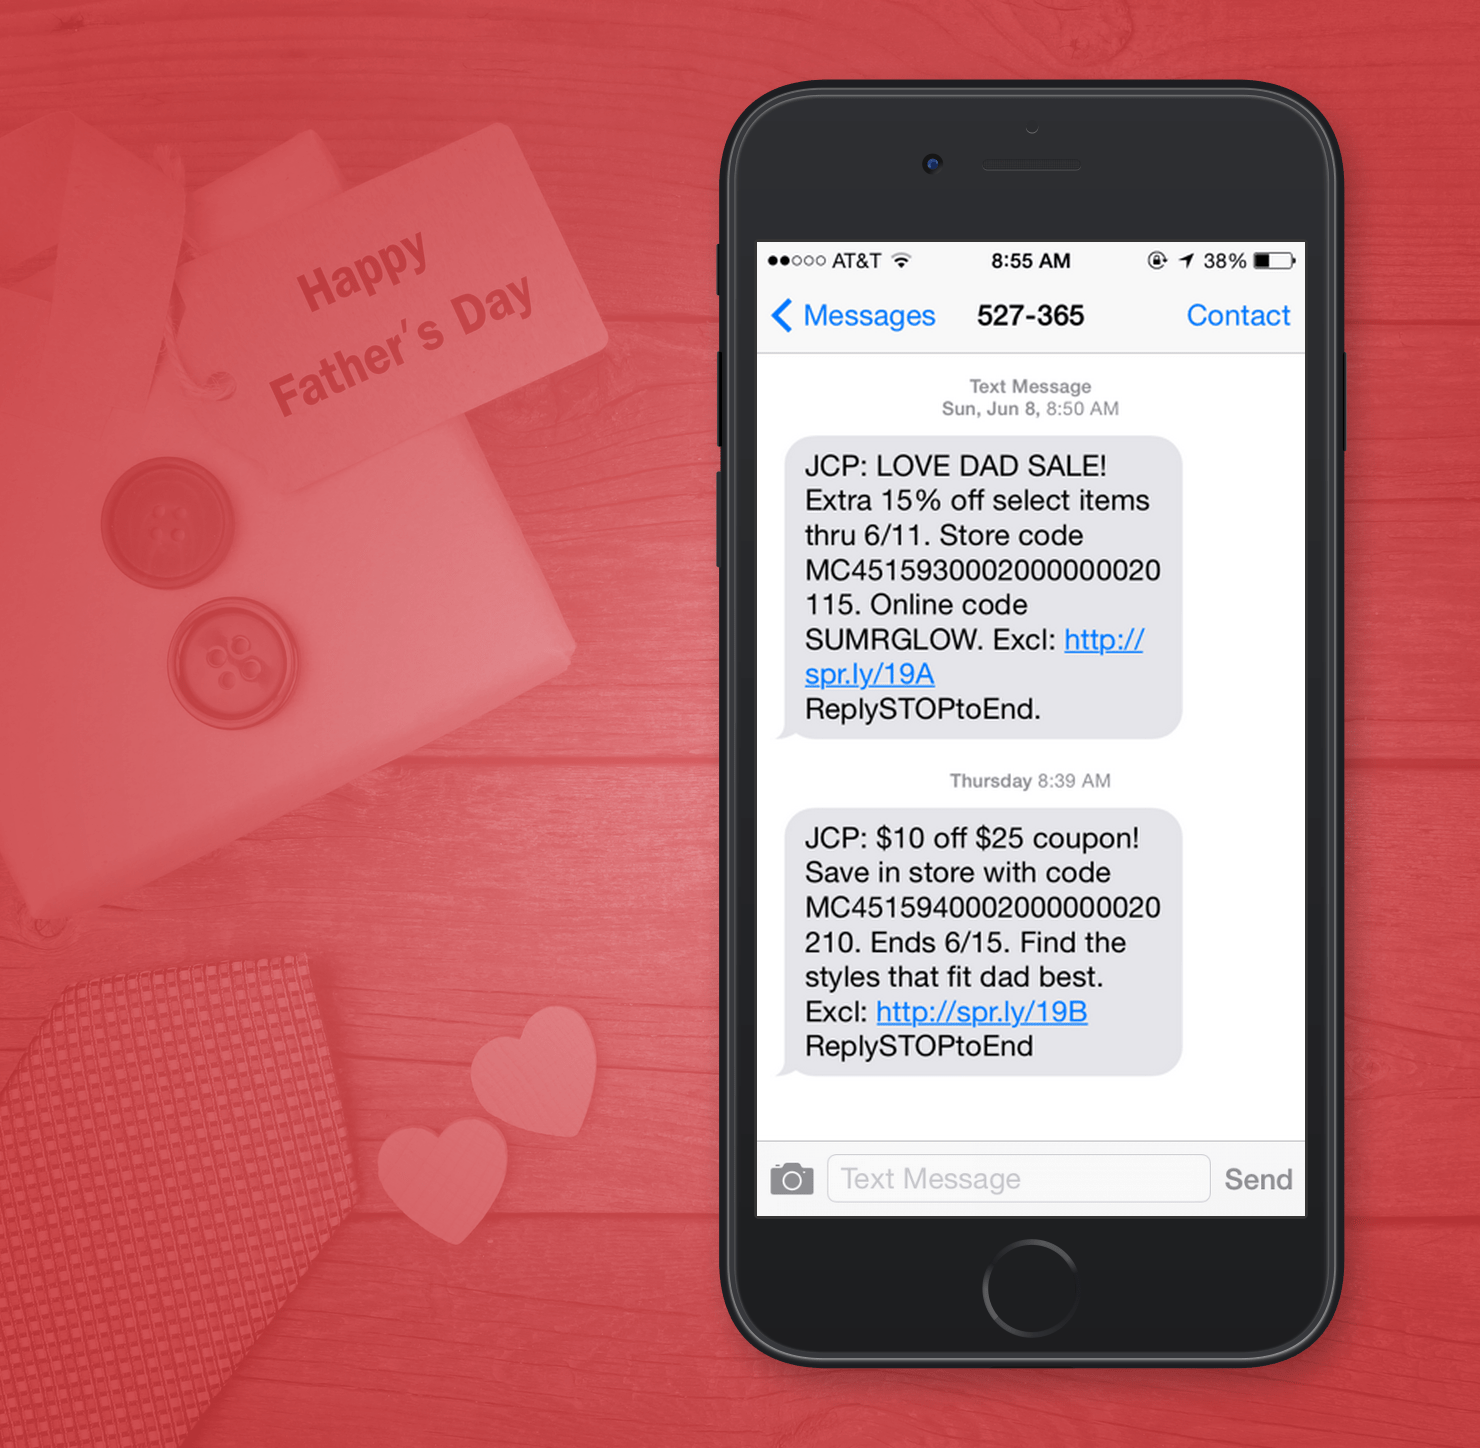 SMS Marketing Examples from JC Penny for Fathers Day